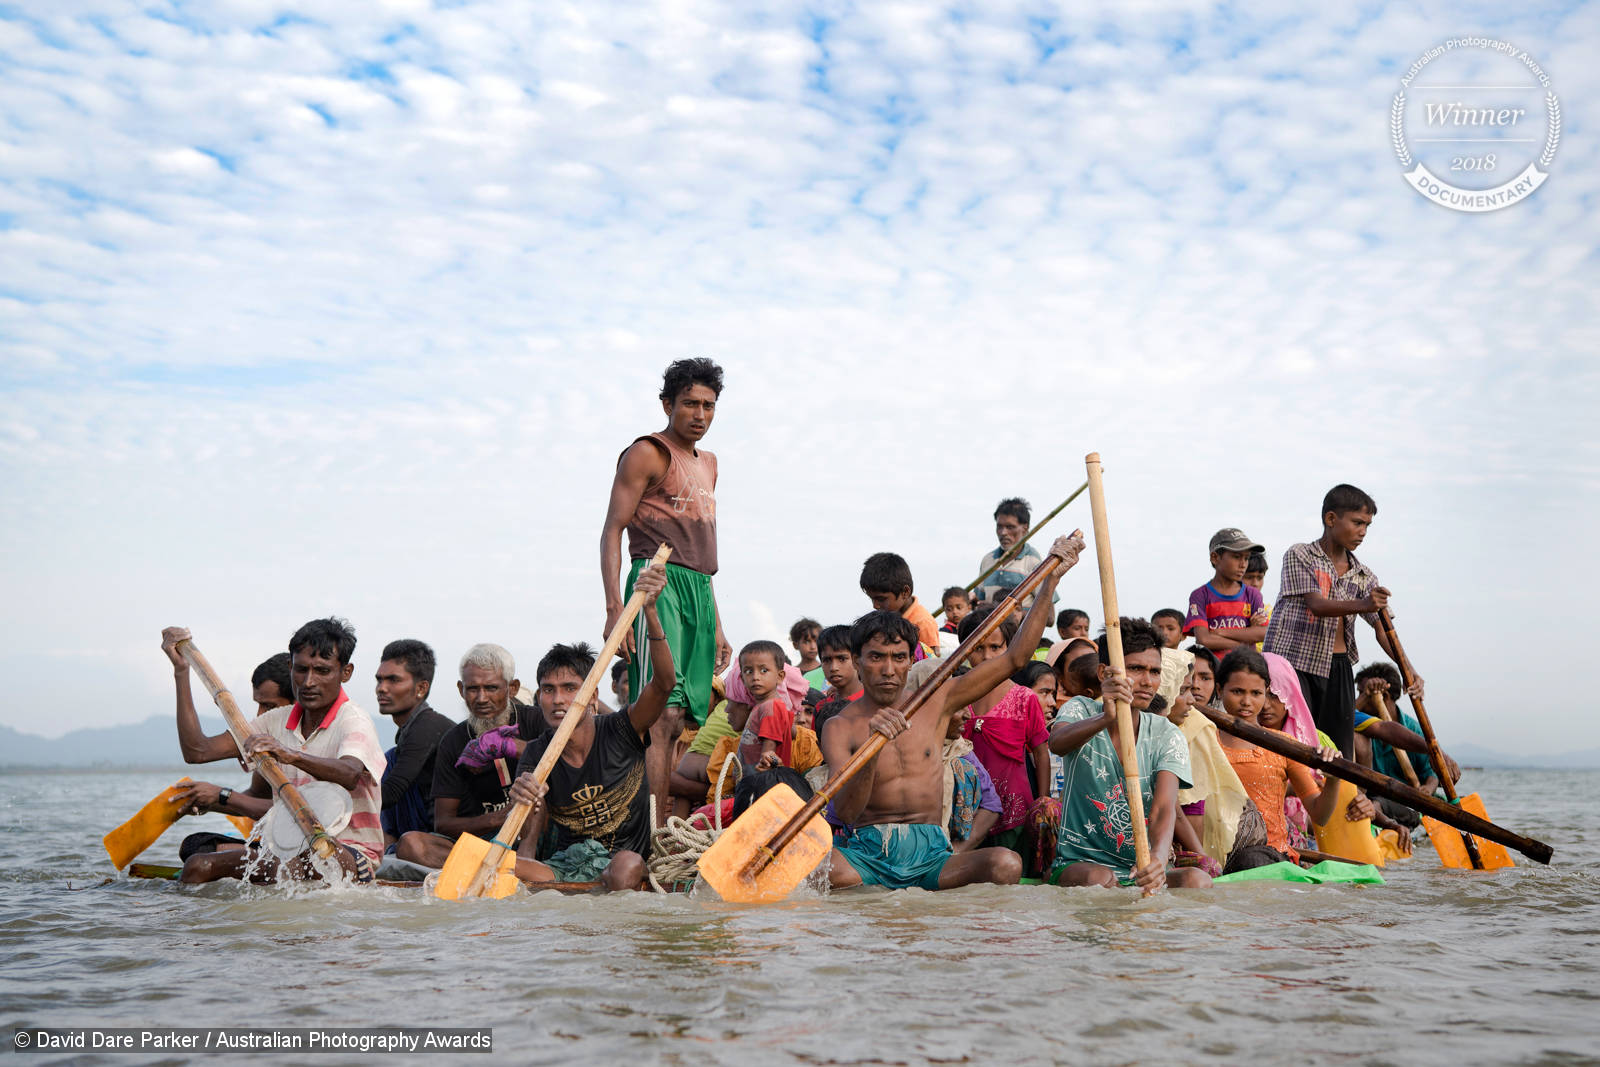 Sunday 12th November 2017. After 16 - 20 days waiting on the Myanmar border, Rohingya refugees cross the Naf River into Bangladesh using eight makeshift rafts made out of bamboo and plastic palm oil containers. Often described as the "world's most persecuted minority", the Rohingya are a Muslim ethnic group from the Rakhine State in Myanmar. In October 2016, a military crackdown in the wake of a deadly attack on an army post sent hundreds of thousands of Rohingya fleeing to neighboring Bangladesh. This most recent exodus from Rakhine state, Myanmar, to the makeshift camps that have sprung up in Coxs Bazar District, began August 25, 2017, when militants from the Arakan Rohingya Salvation Army targeted about 30 police posts and an army base, killing several people. So far more than 650,000 people have fled into Bangladesh, swelling the camps and creating a humanitarian crisis. Photograph by David Dare Parker